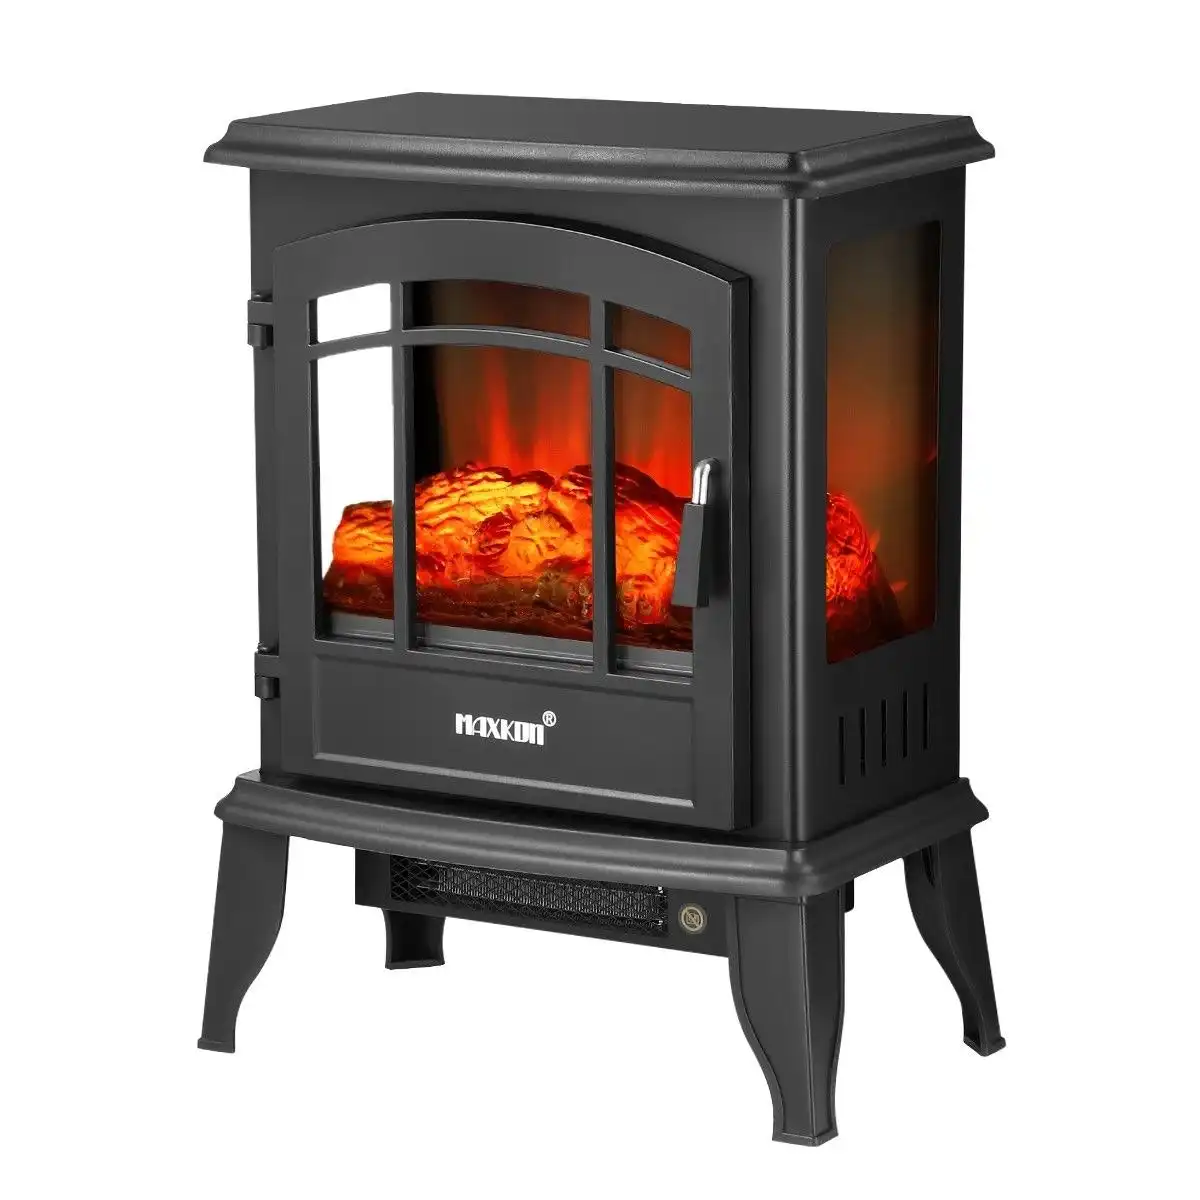 Maxkon 16 Inch Panoramic Electric Fireplace Heater Stove 1800W Portable Flame Thermostat